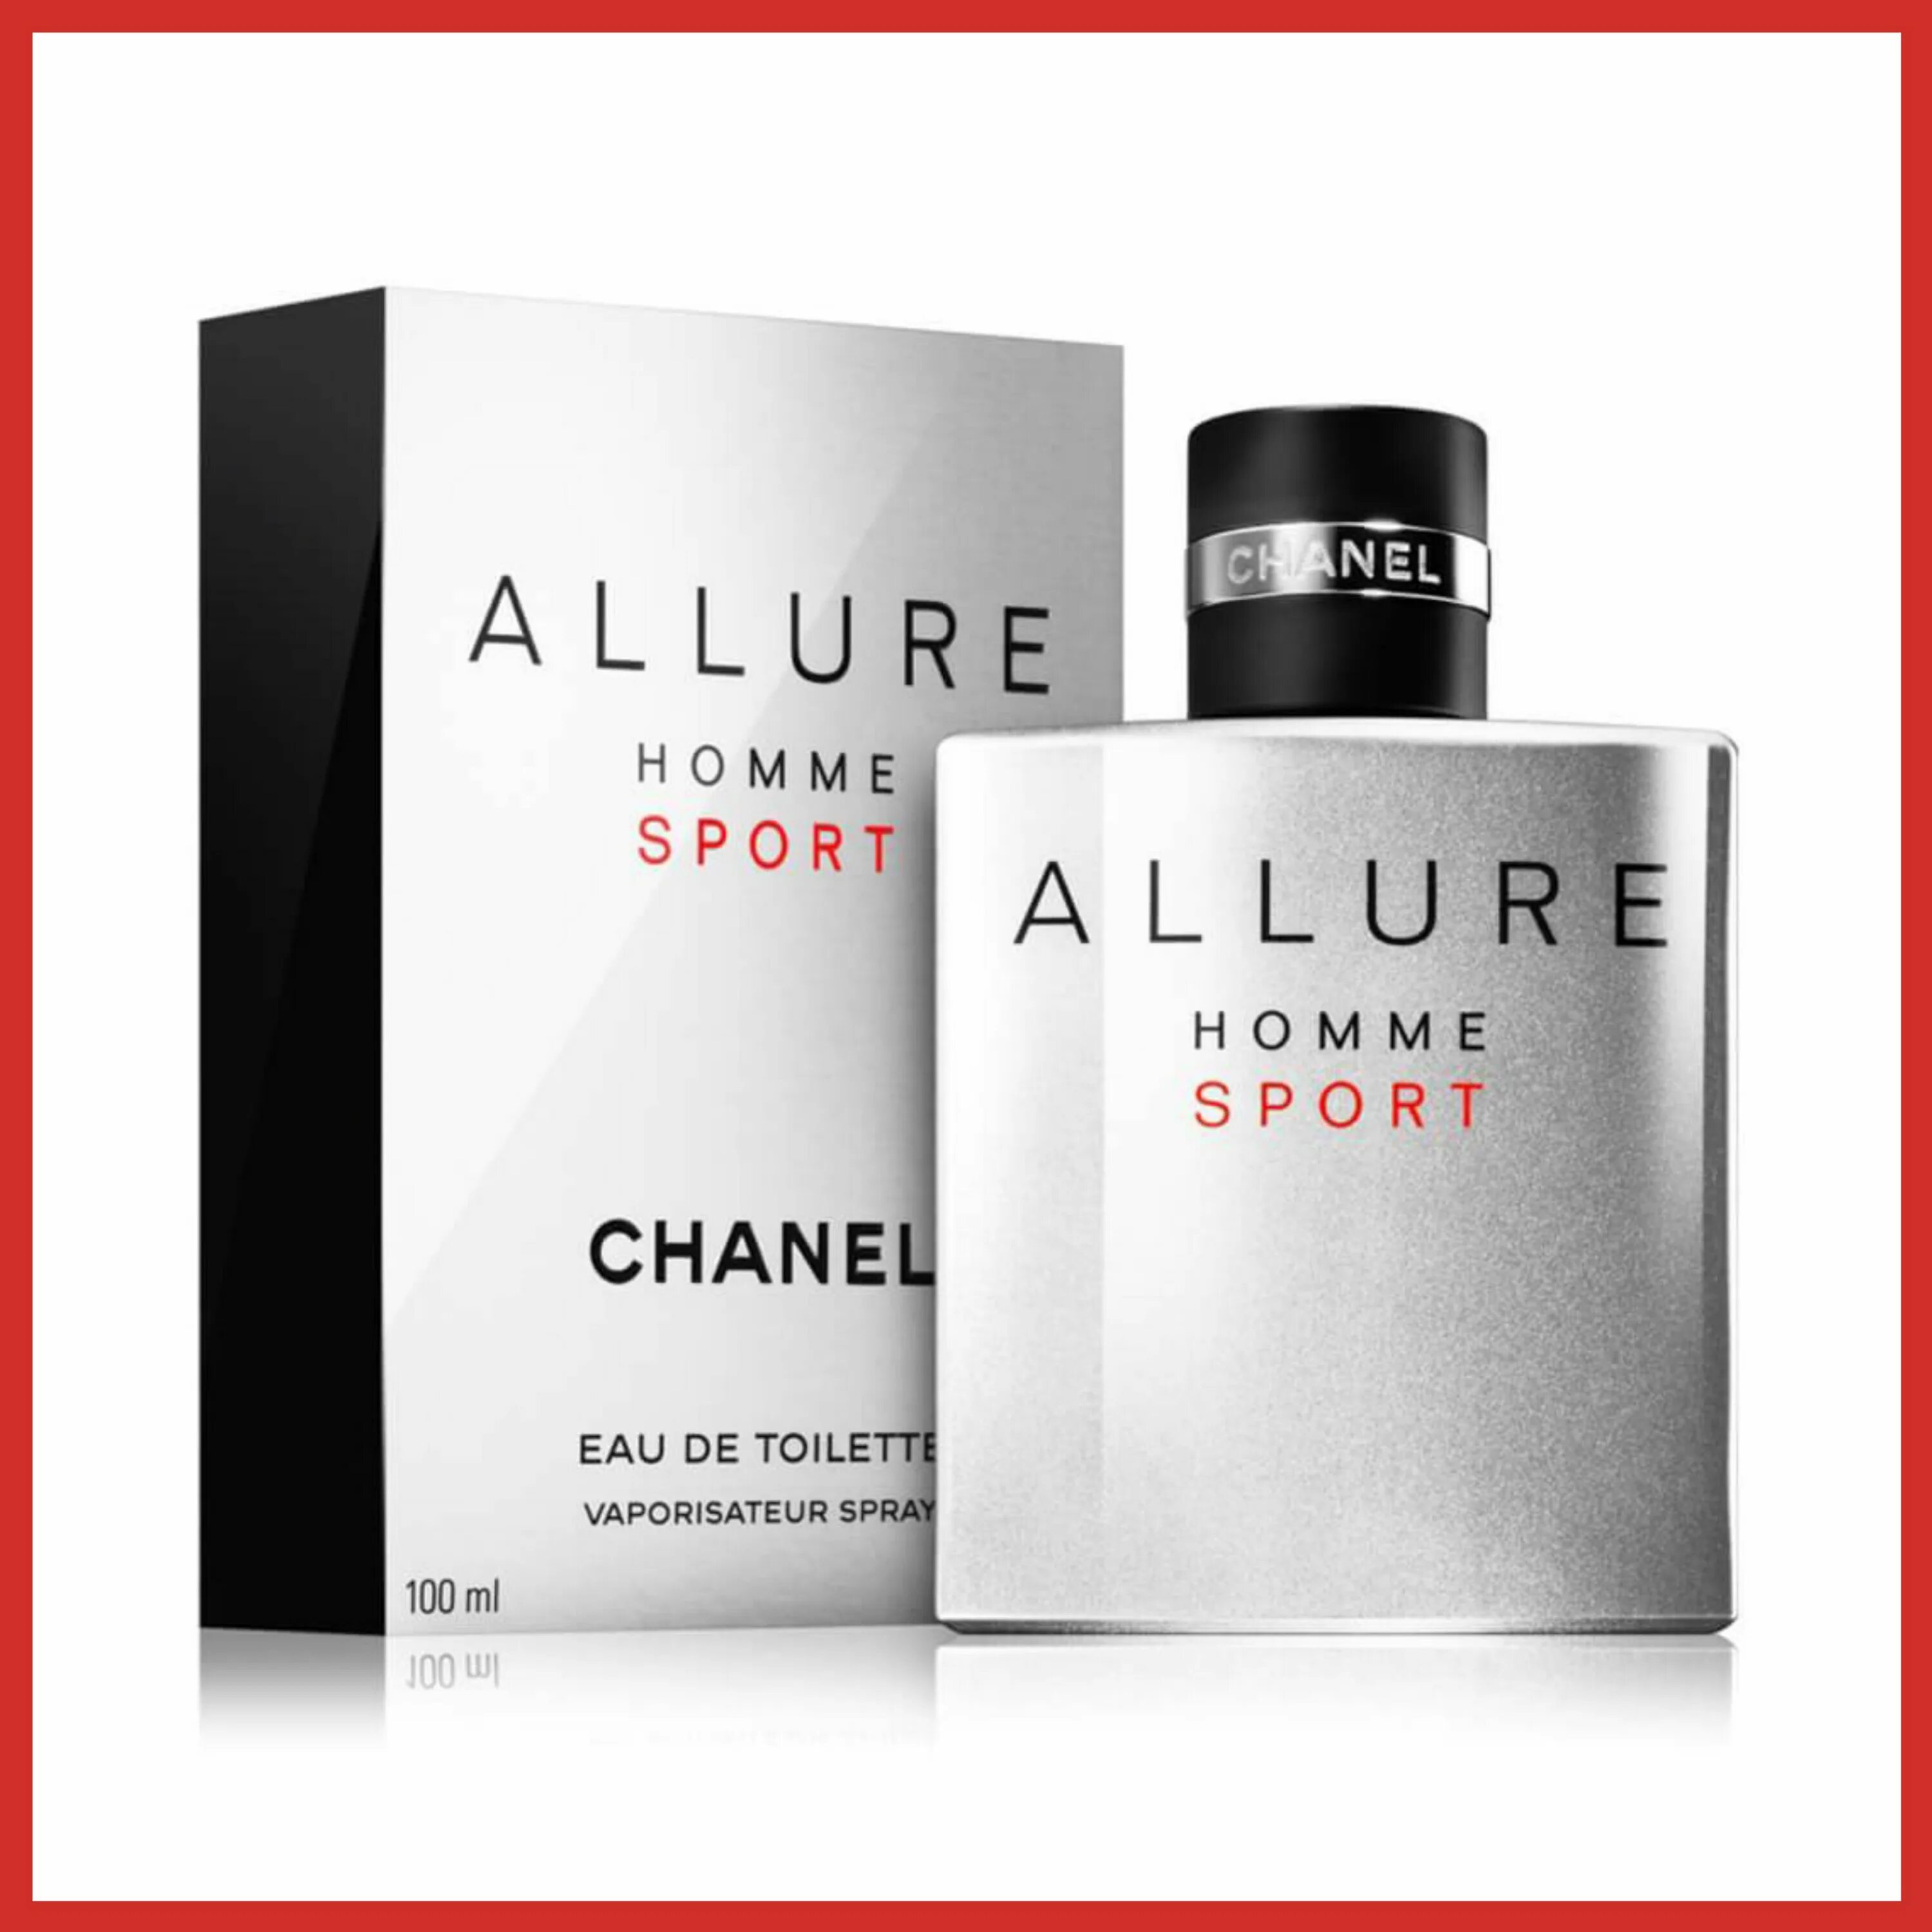 Chanel Allure homme Sport 100ml. Духи Шанель Аллюр спорт. Chanel Allure homme Sport EDT 150ml. Духи Chanel Allure homme Sport. Allure homme sport eau